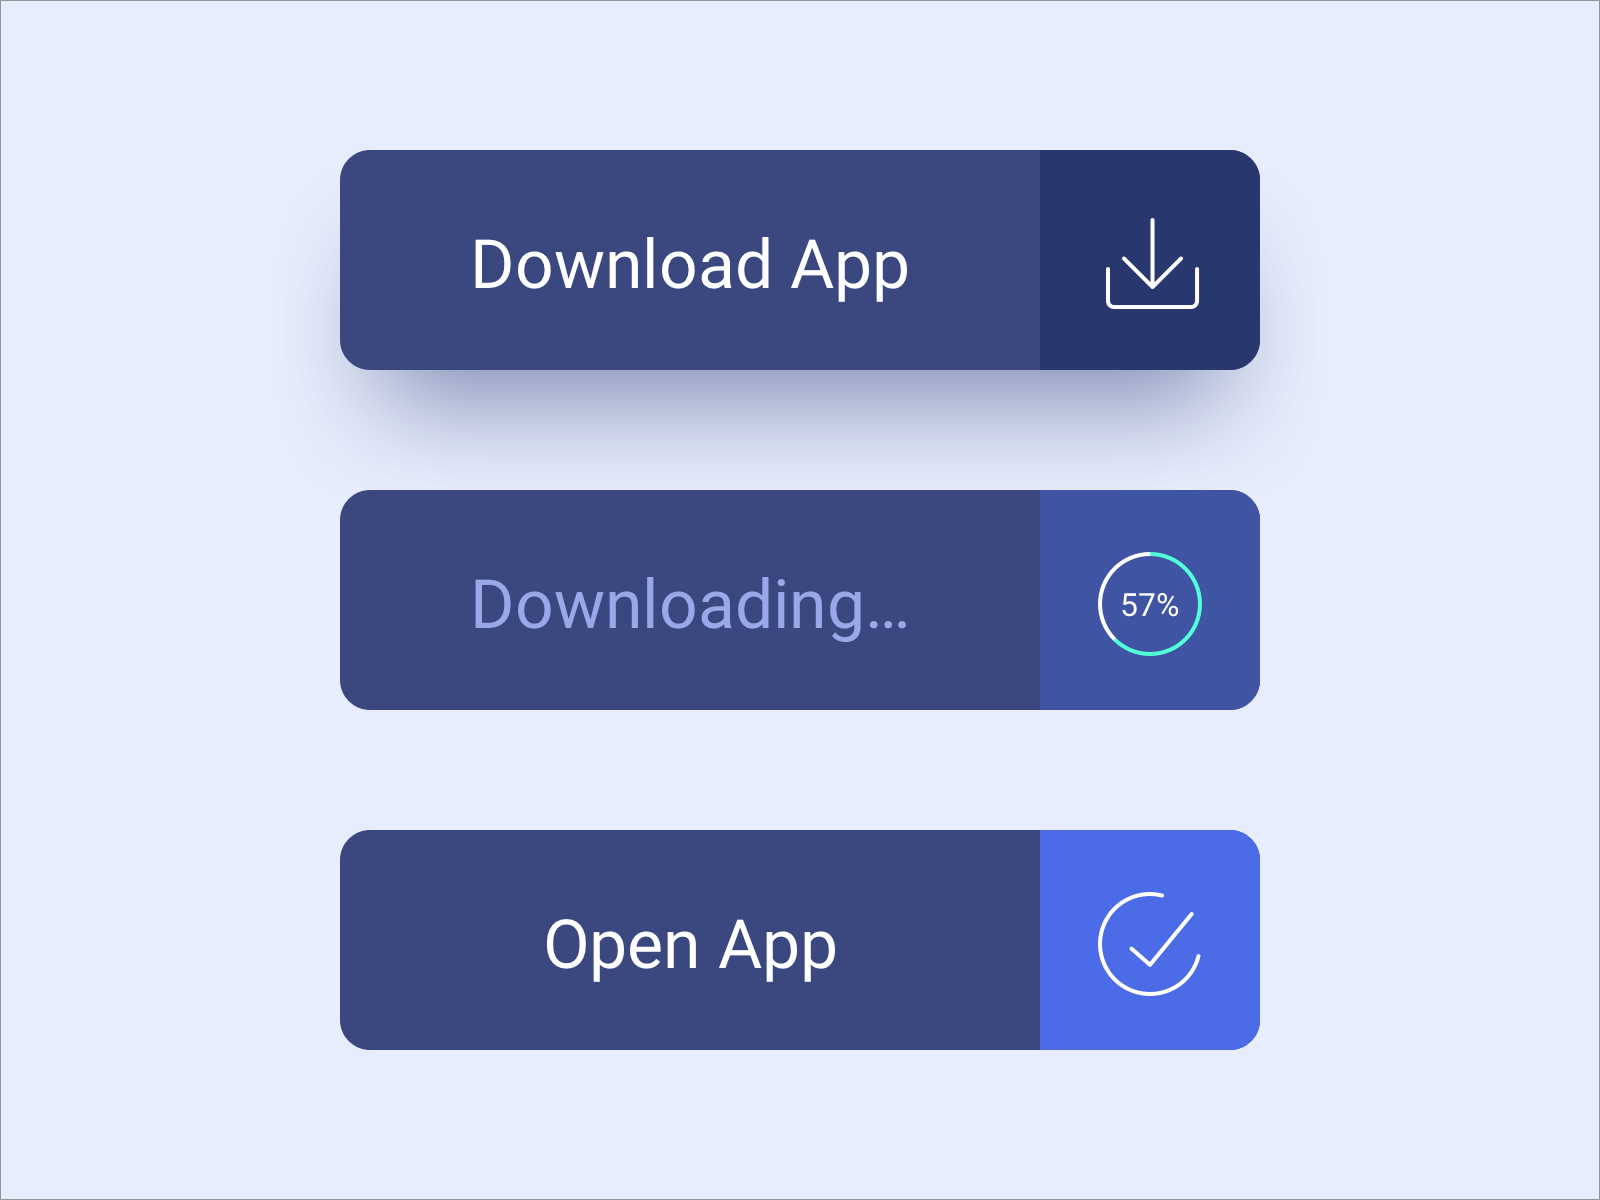 Download App Button #DailyUI #day074.